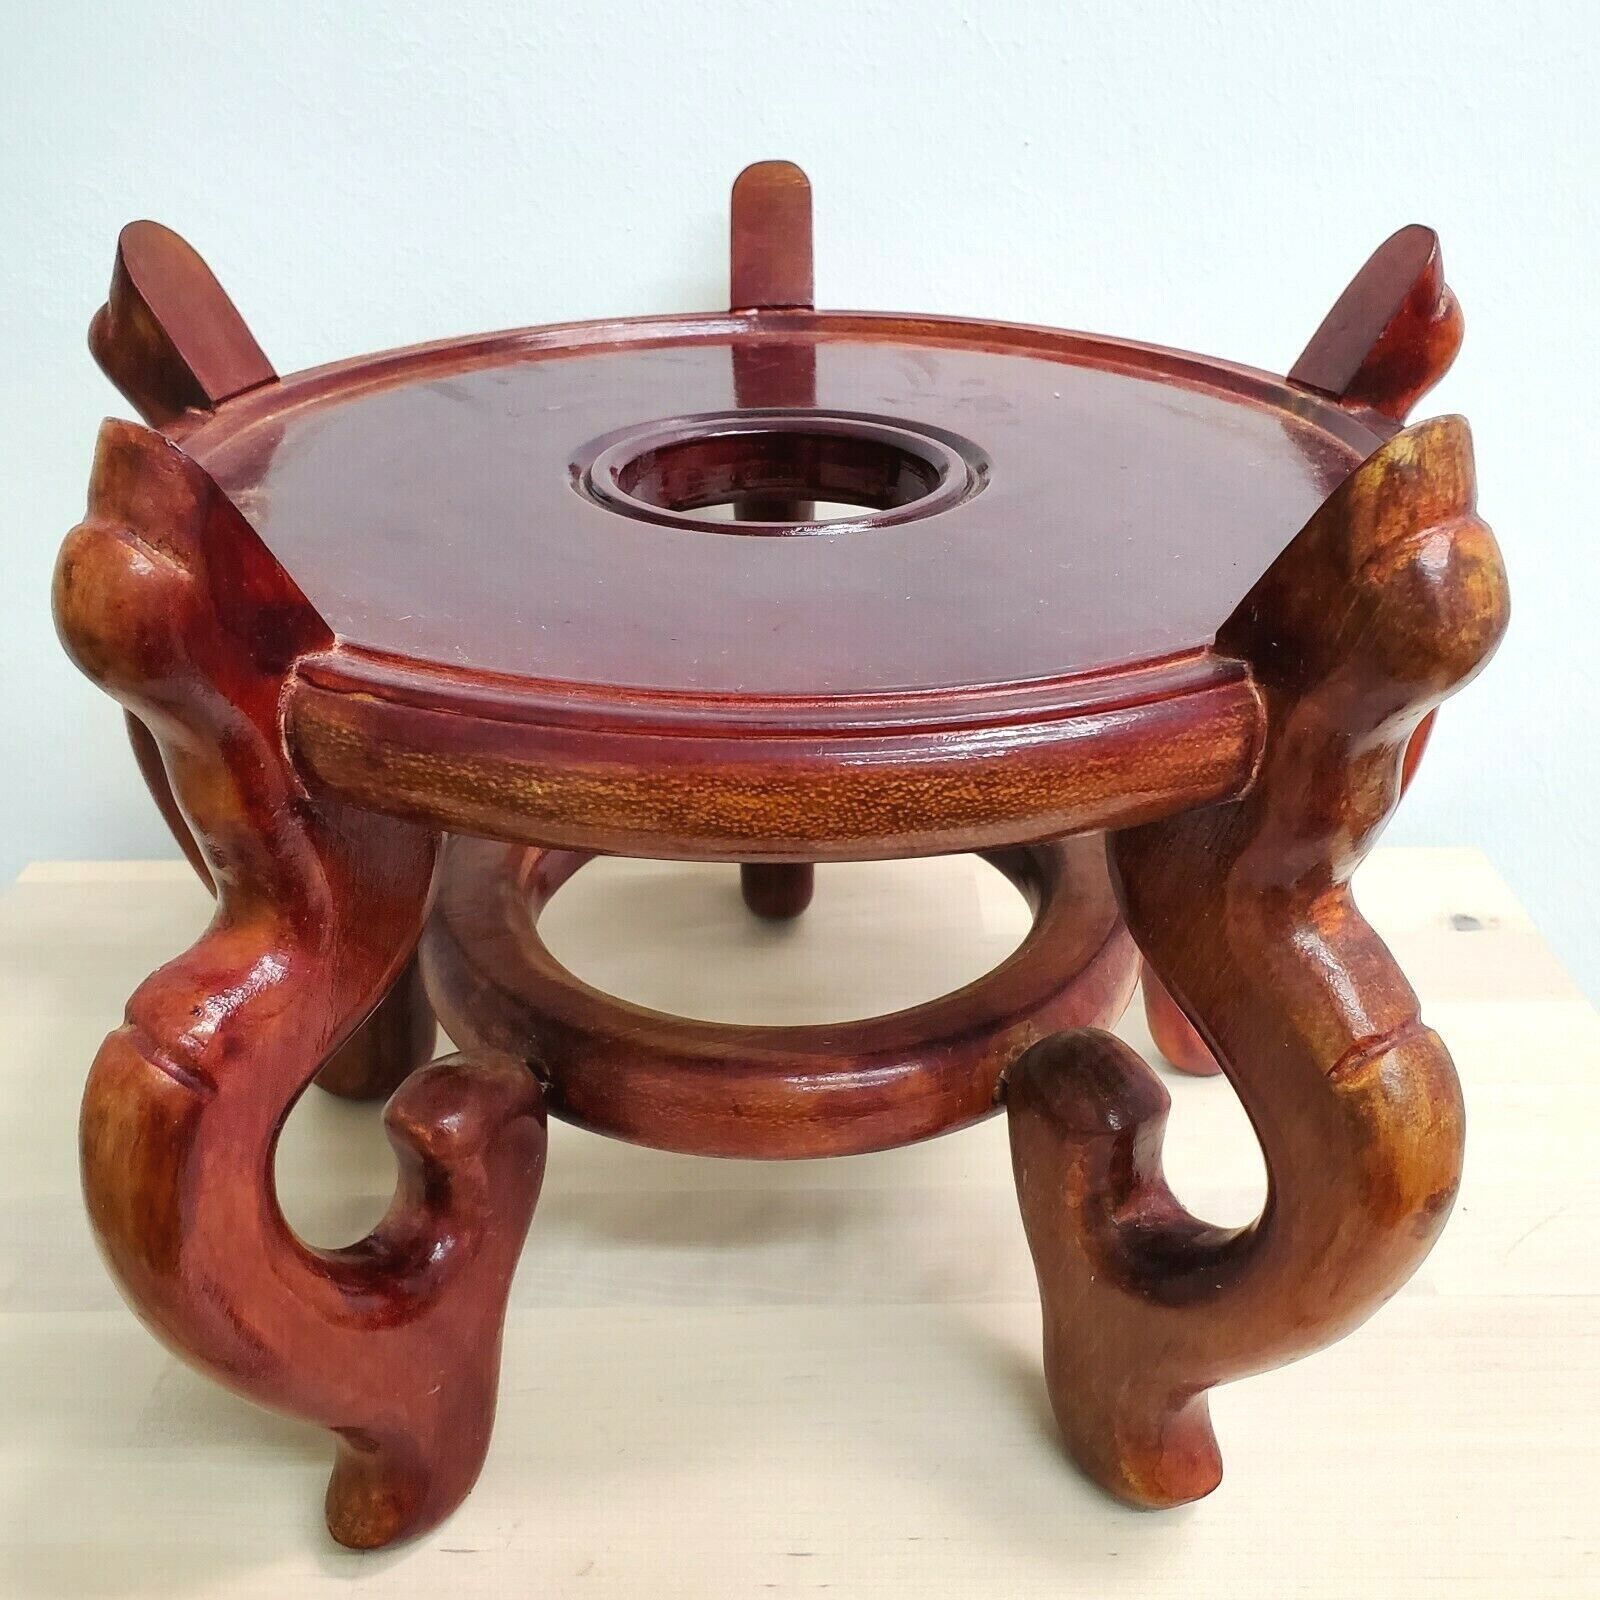 Vintage Fishbowl Plant Stand Display Carved Wood Asian Chinese Large Sturdy  | Ebay In Fishbowl Plant Stands (View 9 of 15)